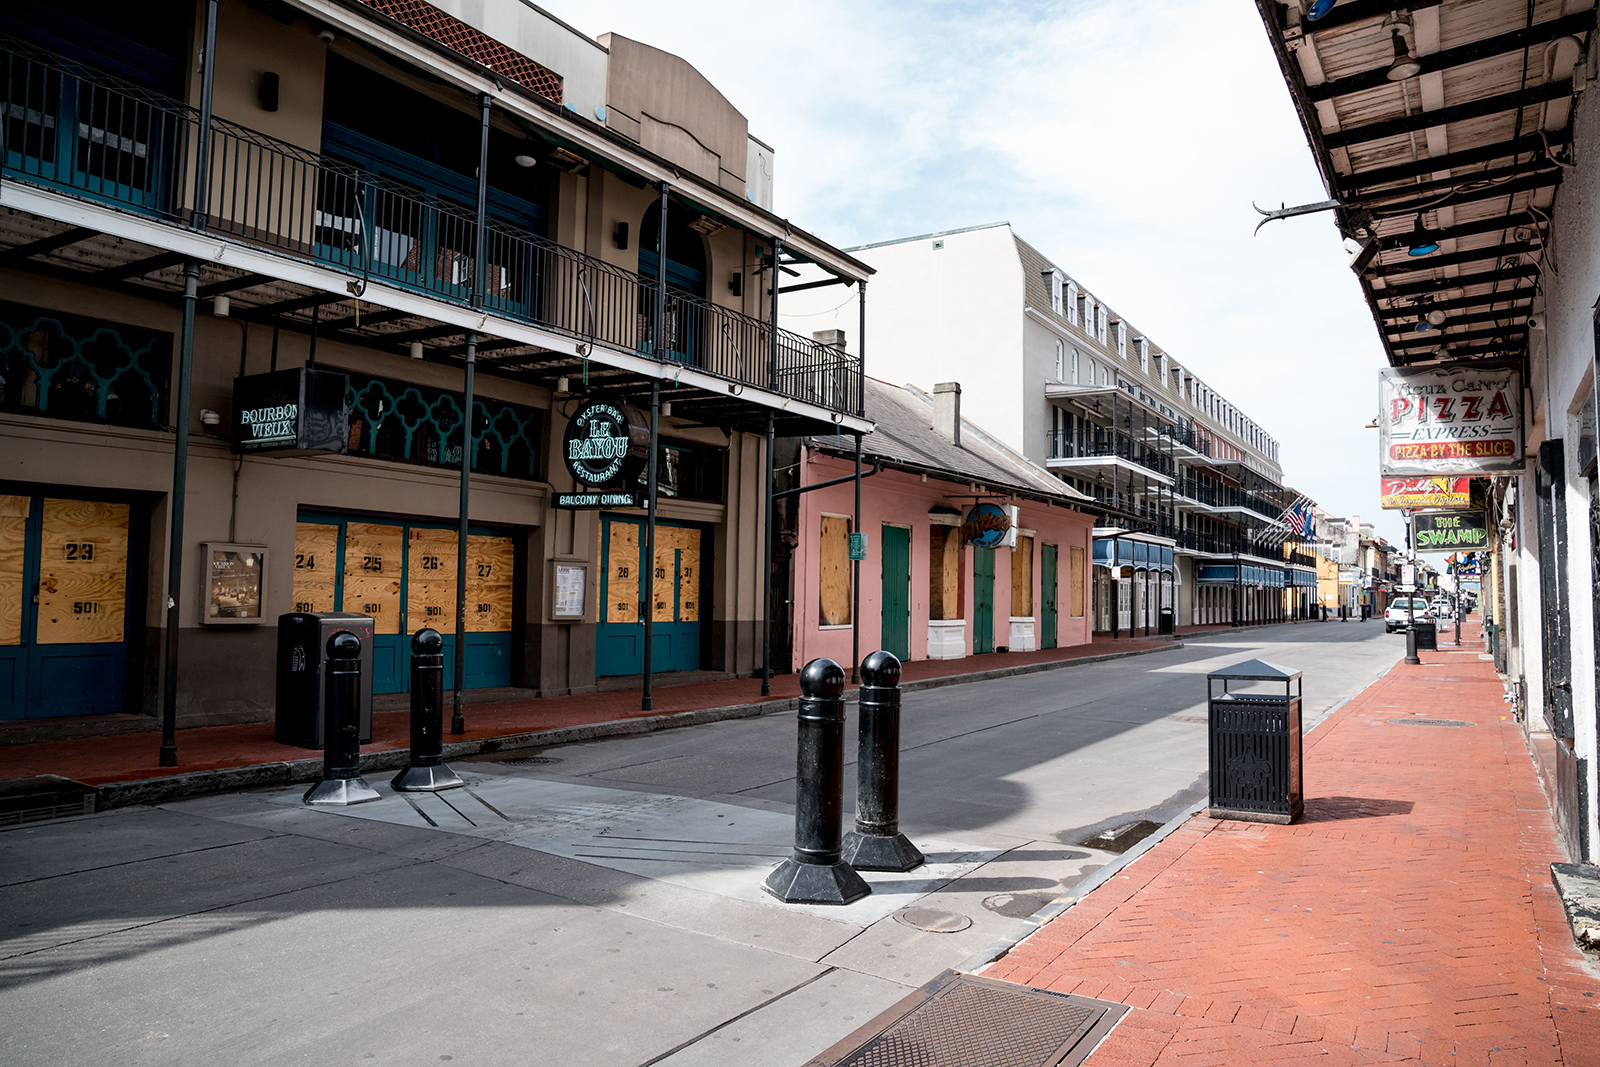 Typically filled with people, Bourbon Street is seen nearly empty in New Orleans, Louisiana on April 23.